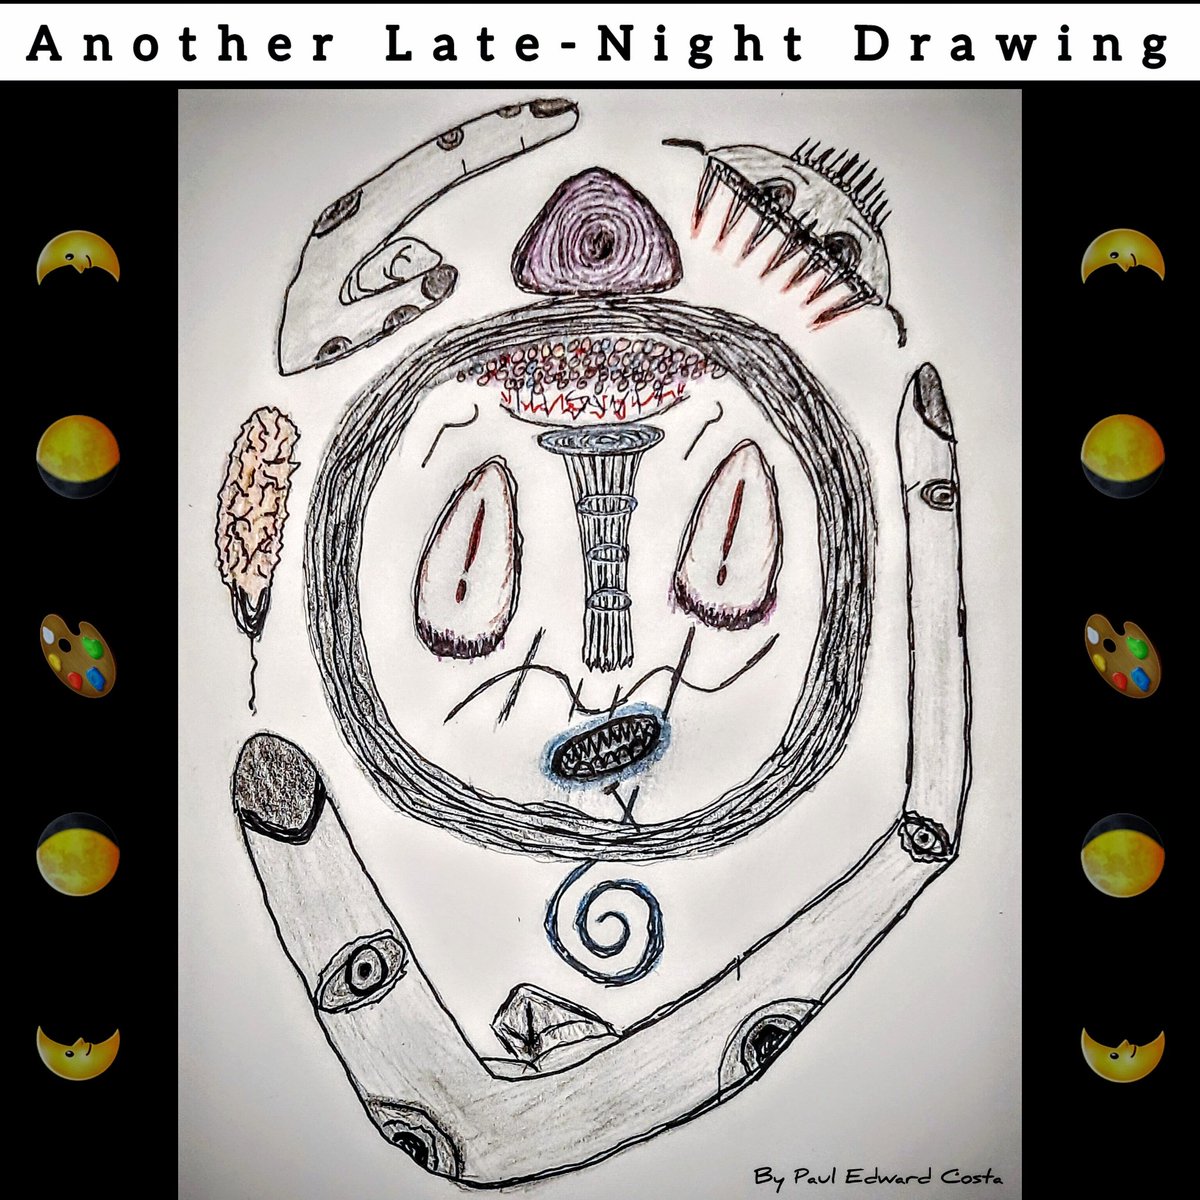 Another bit of late-night artwork from my notebook ✍️ 📖 🎨🌜🌖

#sketchbook #sketch #sketching #drawing #pencilandink #pencilandinkdrawing #visualart #inkdrawing #amateurartist #pencilcrayonart #pencilcrayons #latenightdrawing #nighttimeart #nightsketches #roughsketch #nightart